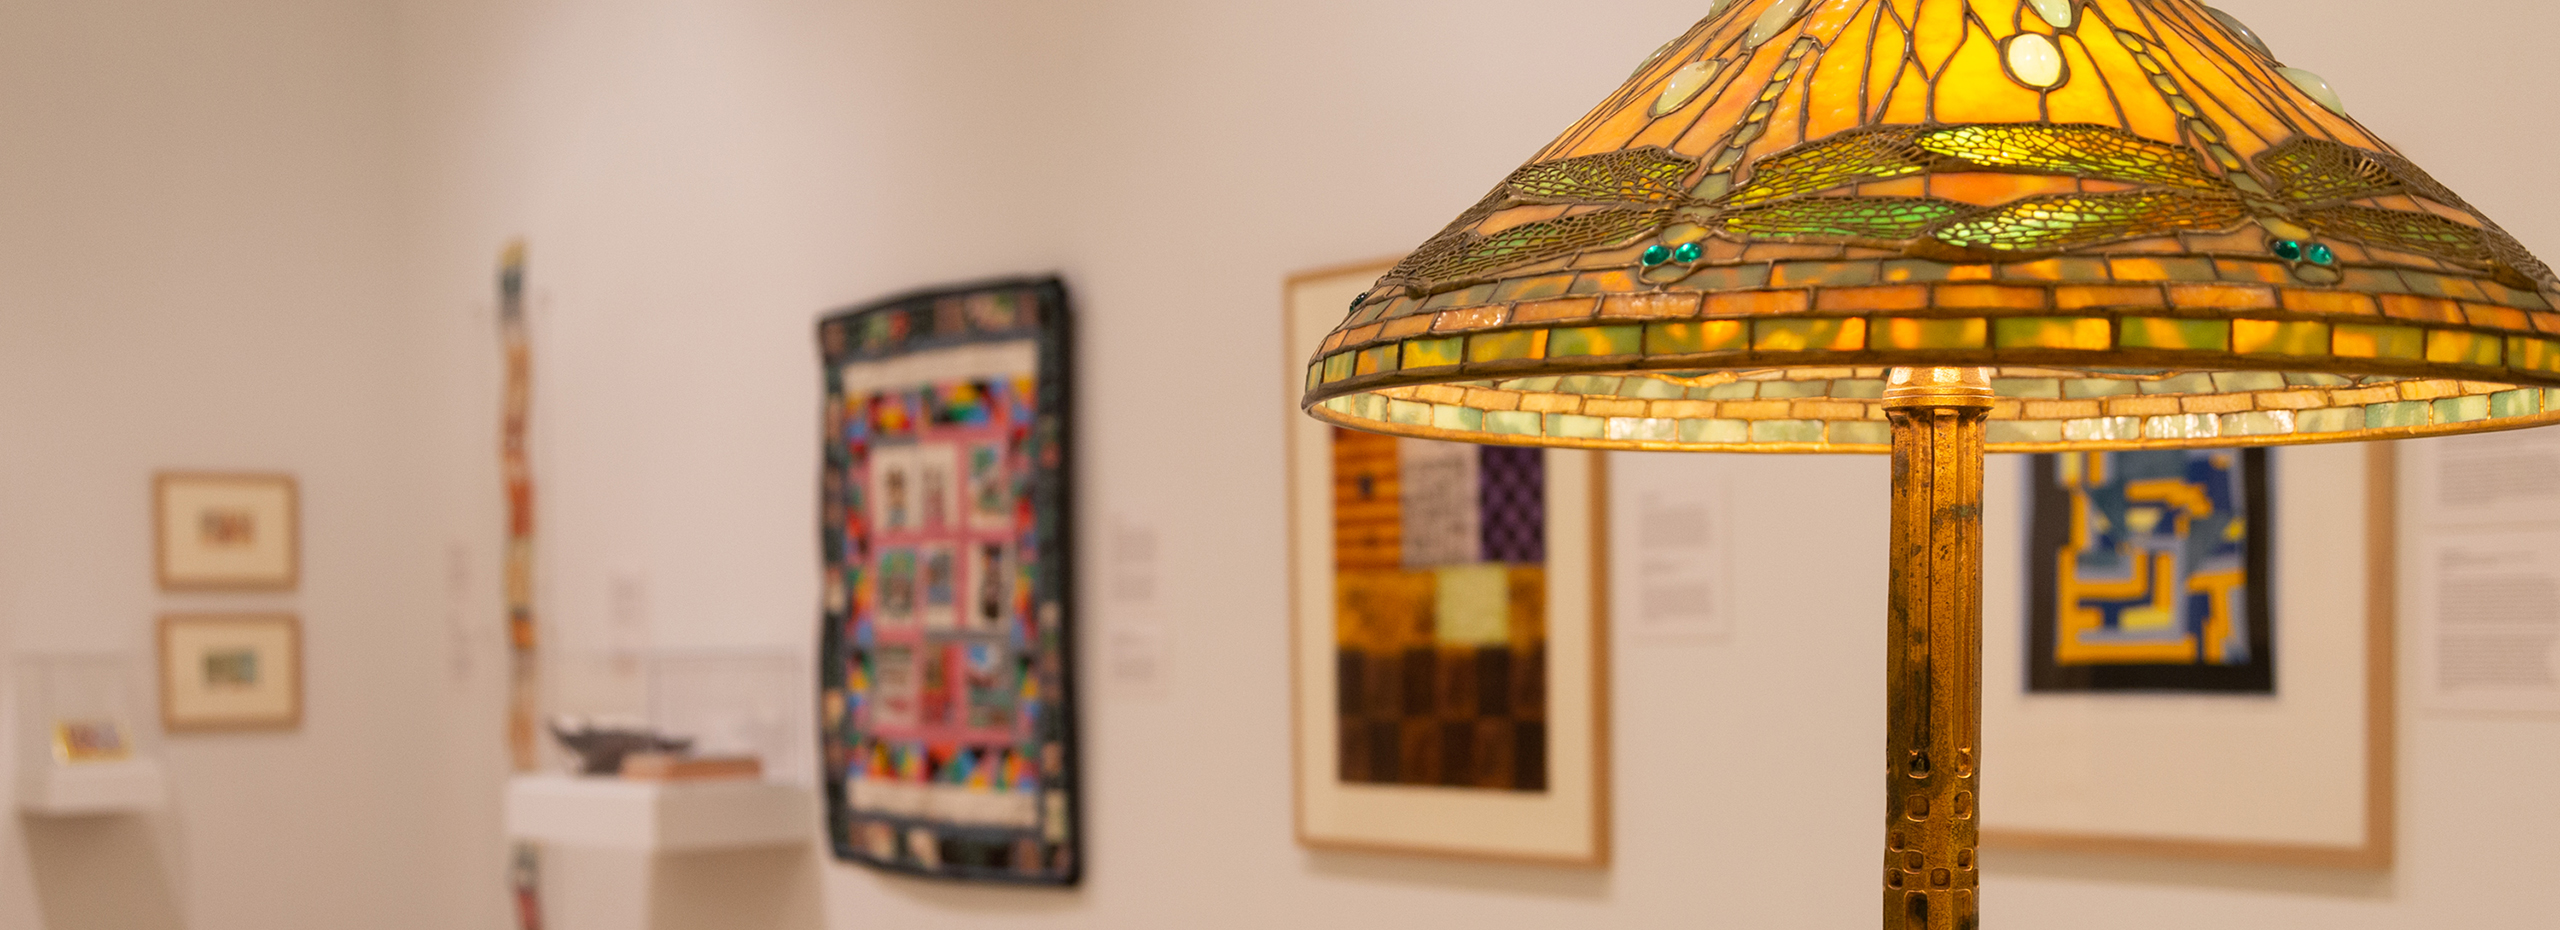 A lit stained glass lamp is in the foreground at right and a variety of colorful artworks are out of focus in the background